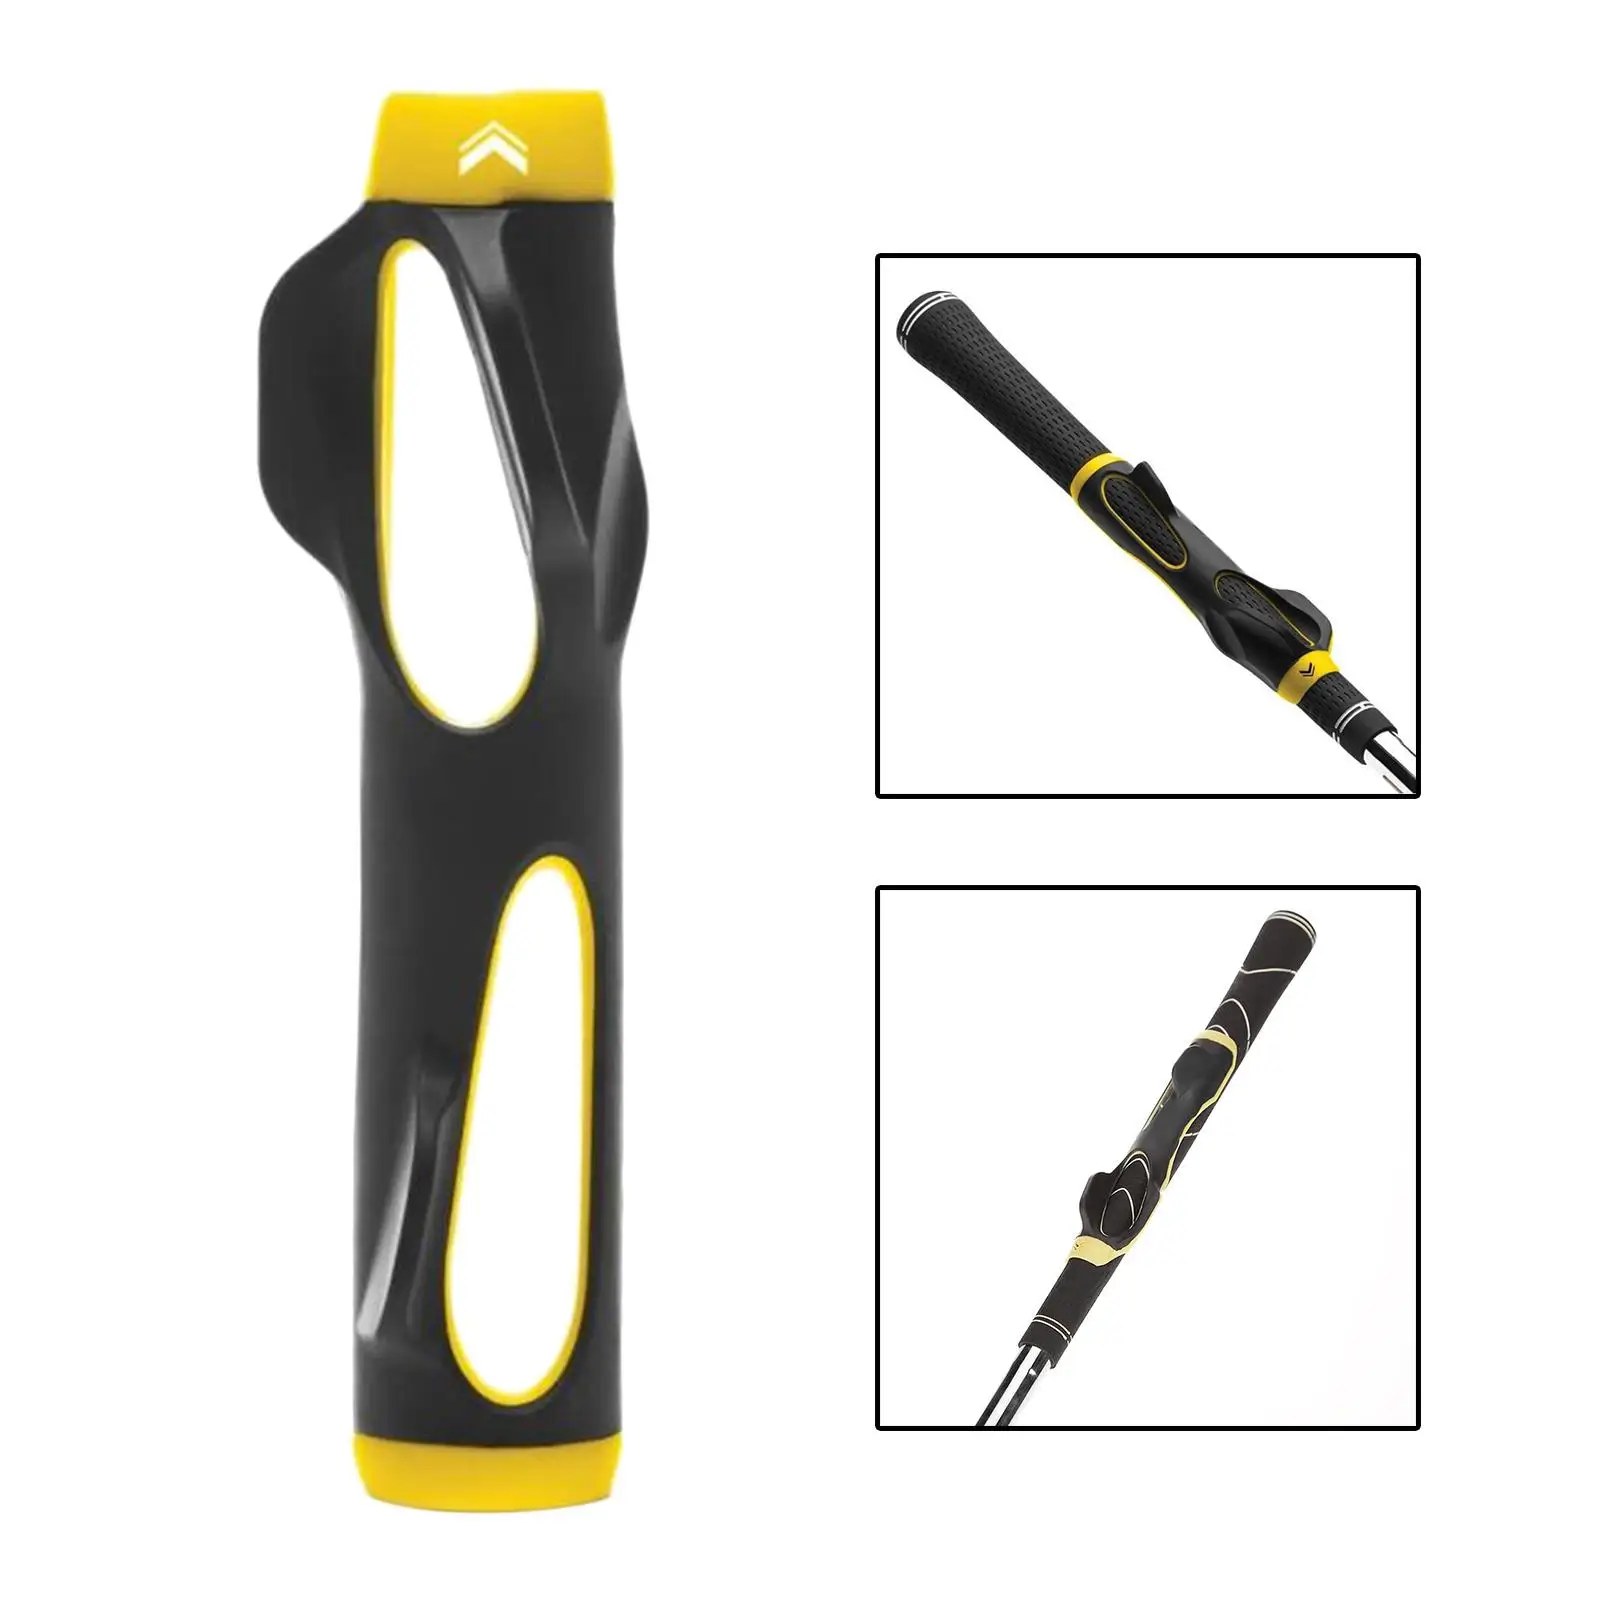 Portable Golf Swing Training Grip Auxiliary Corrector Golf Swing Trainer Tool for Exercise Indoor Outdoor Golf Club Equipment